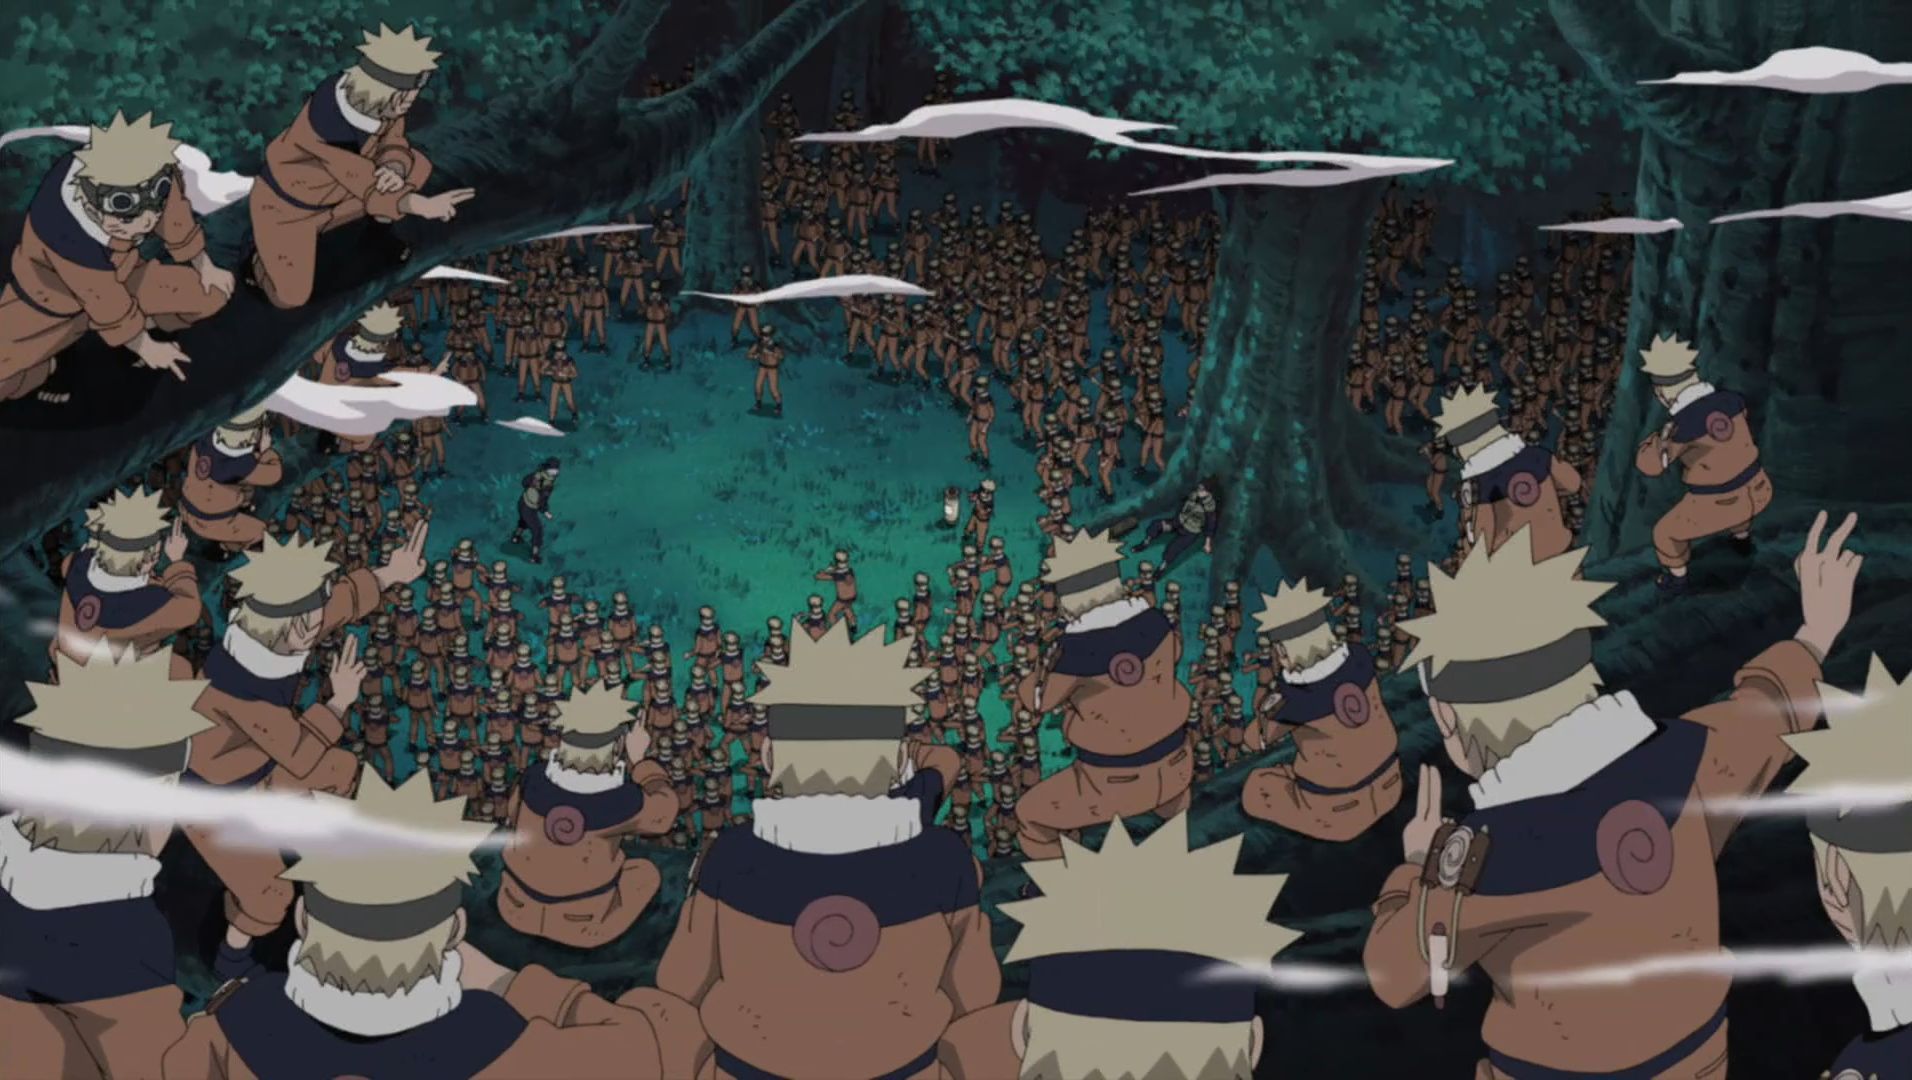 Looking at what could be considered as the best jutsu in the series (Image via Kishimoto/Shueisha, Naruto)